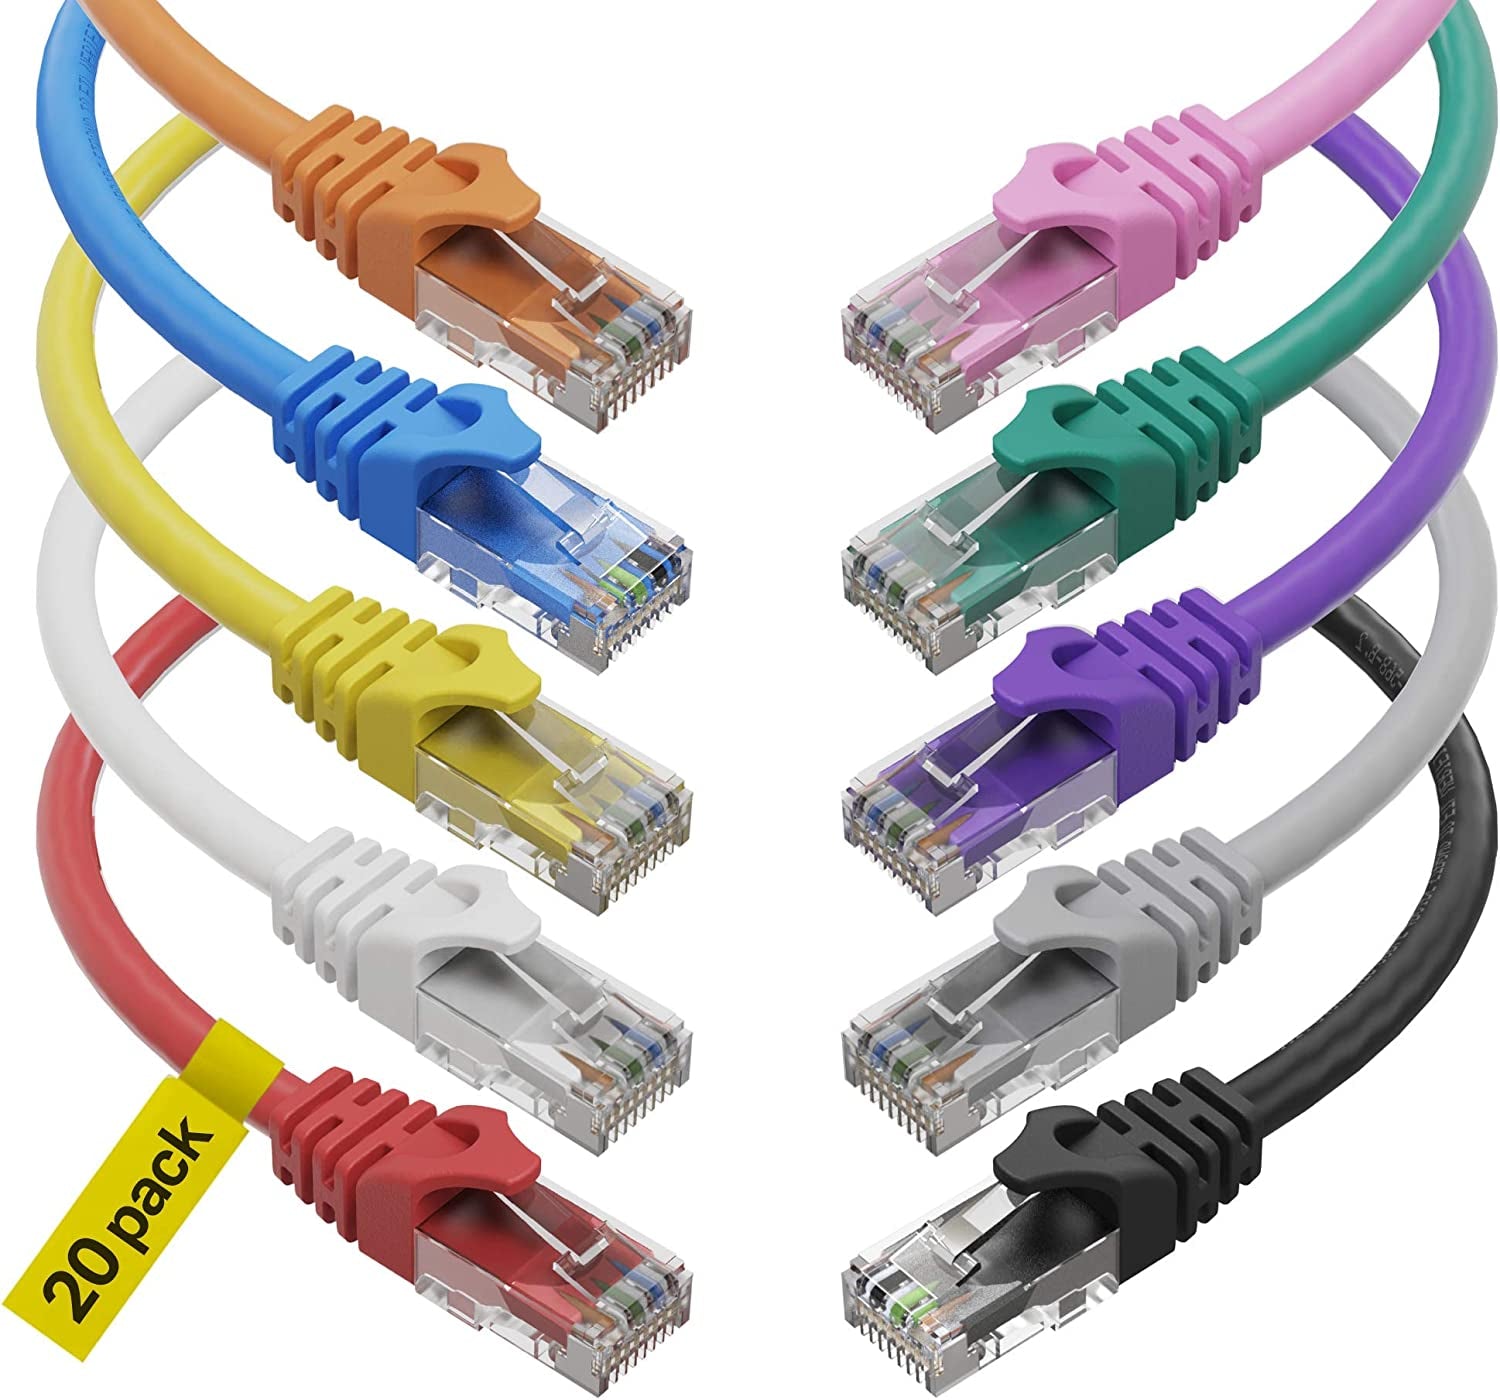 Cat6 Ethernet Cable (1 Feet) LAN, UTP Cat 6 RJ45, Network, Patch, Internet Cable - 20 Pack (1 Ft)